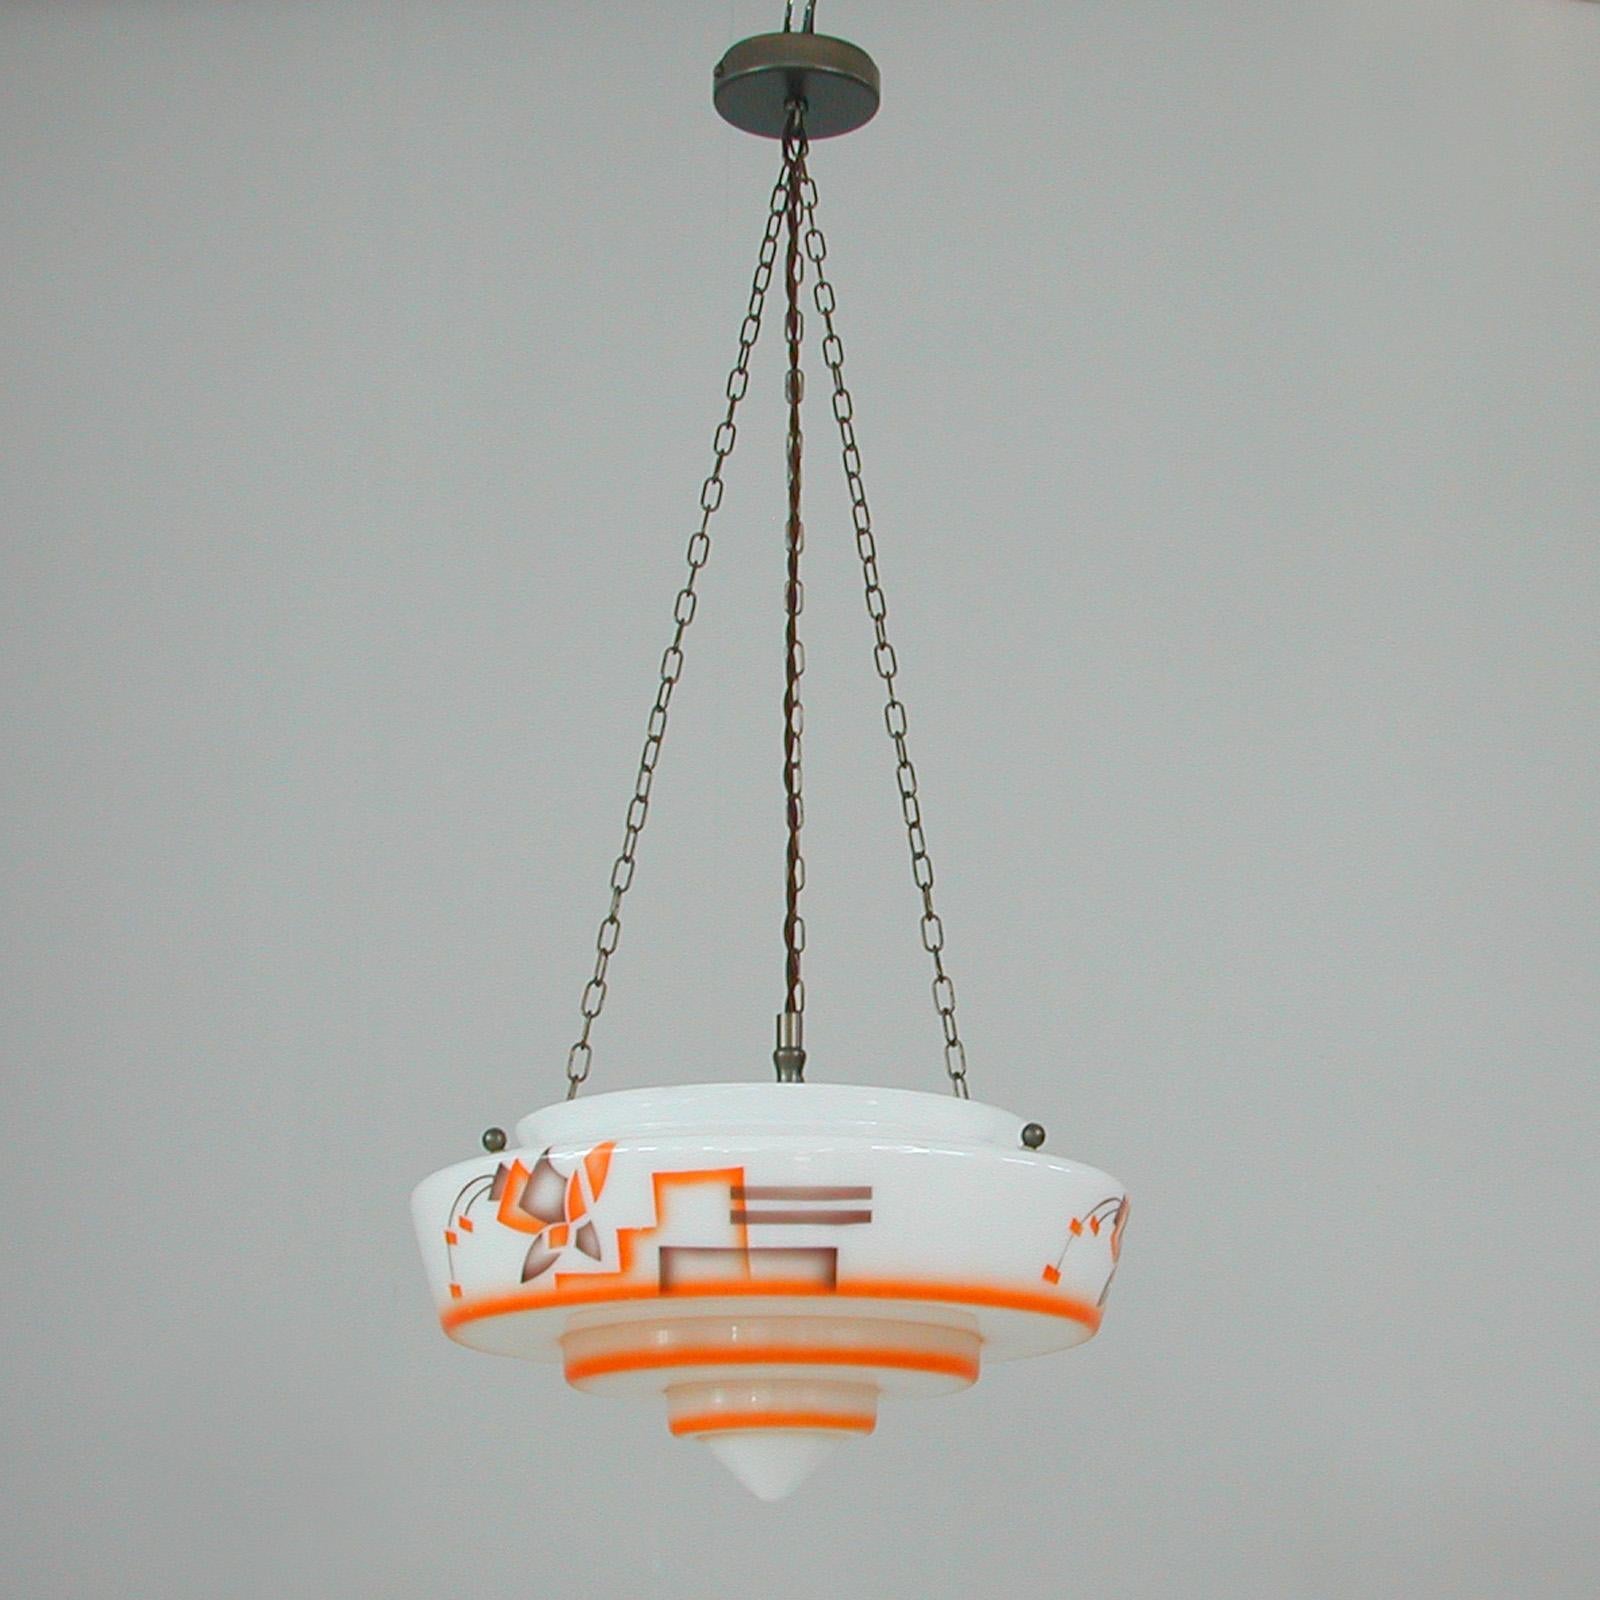 This unique Bauhaus inspired glass pendant was designed and manufactured in Germany in the 1930s. The light features a large tiered glass diffuser with enameled paintbrush decor in orange and brown. Suspended by patinated brass hardware. 

Good